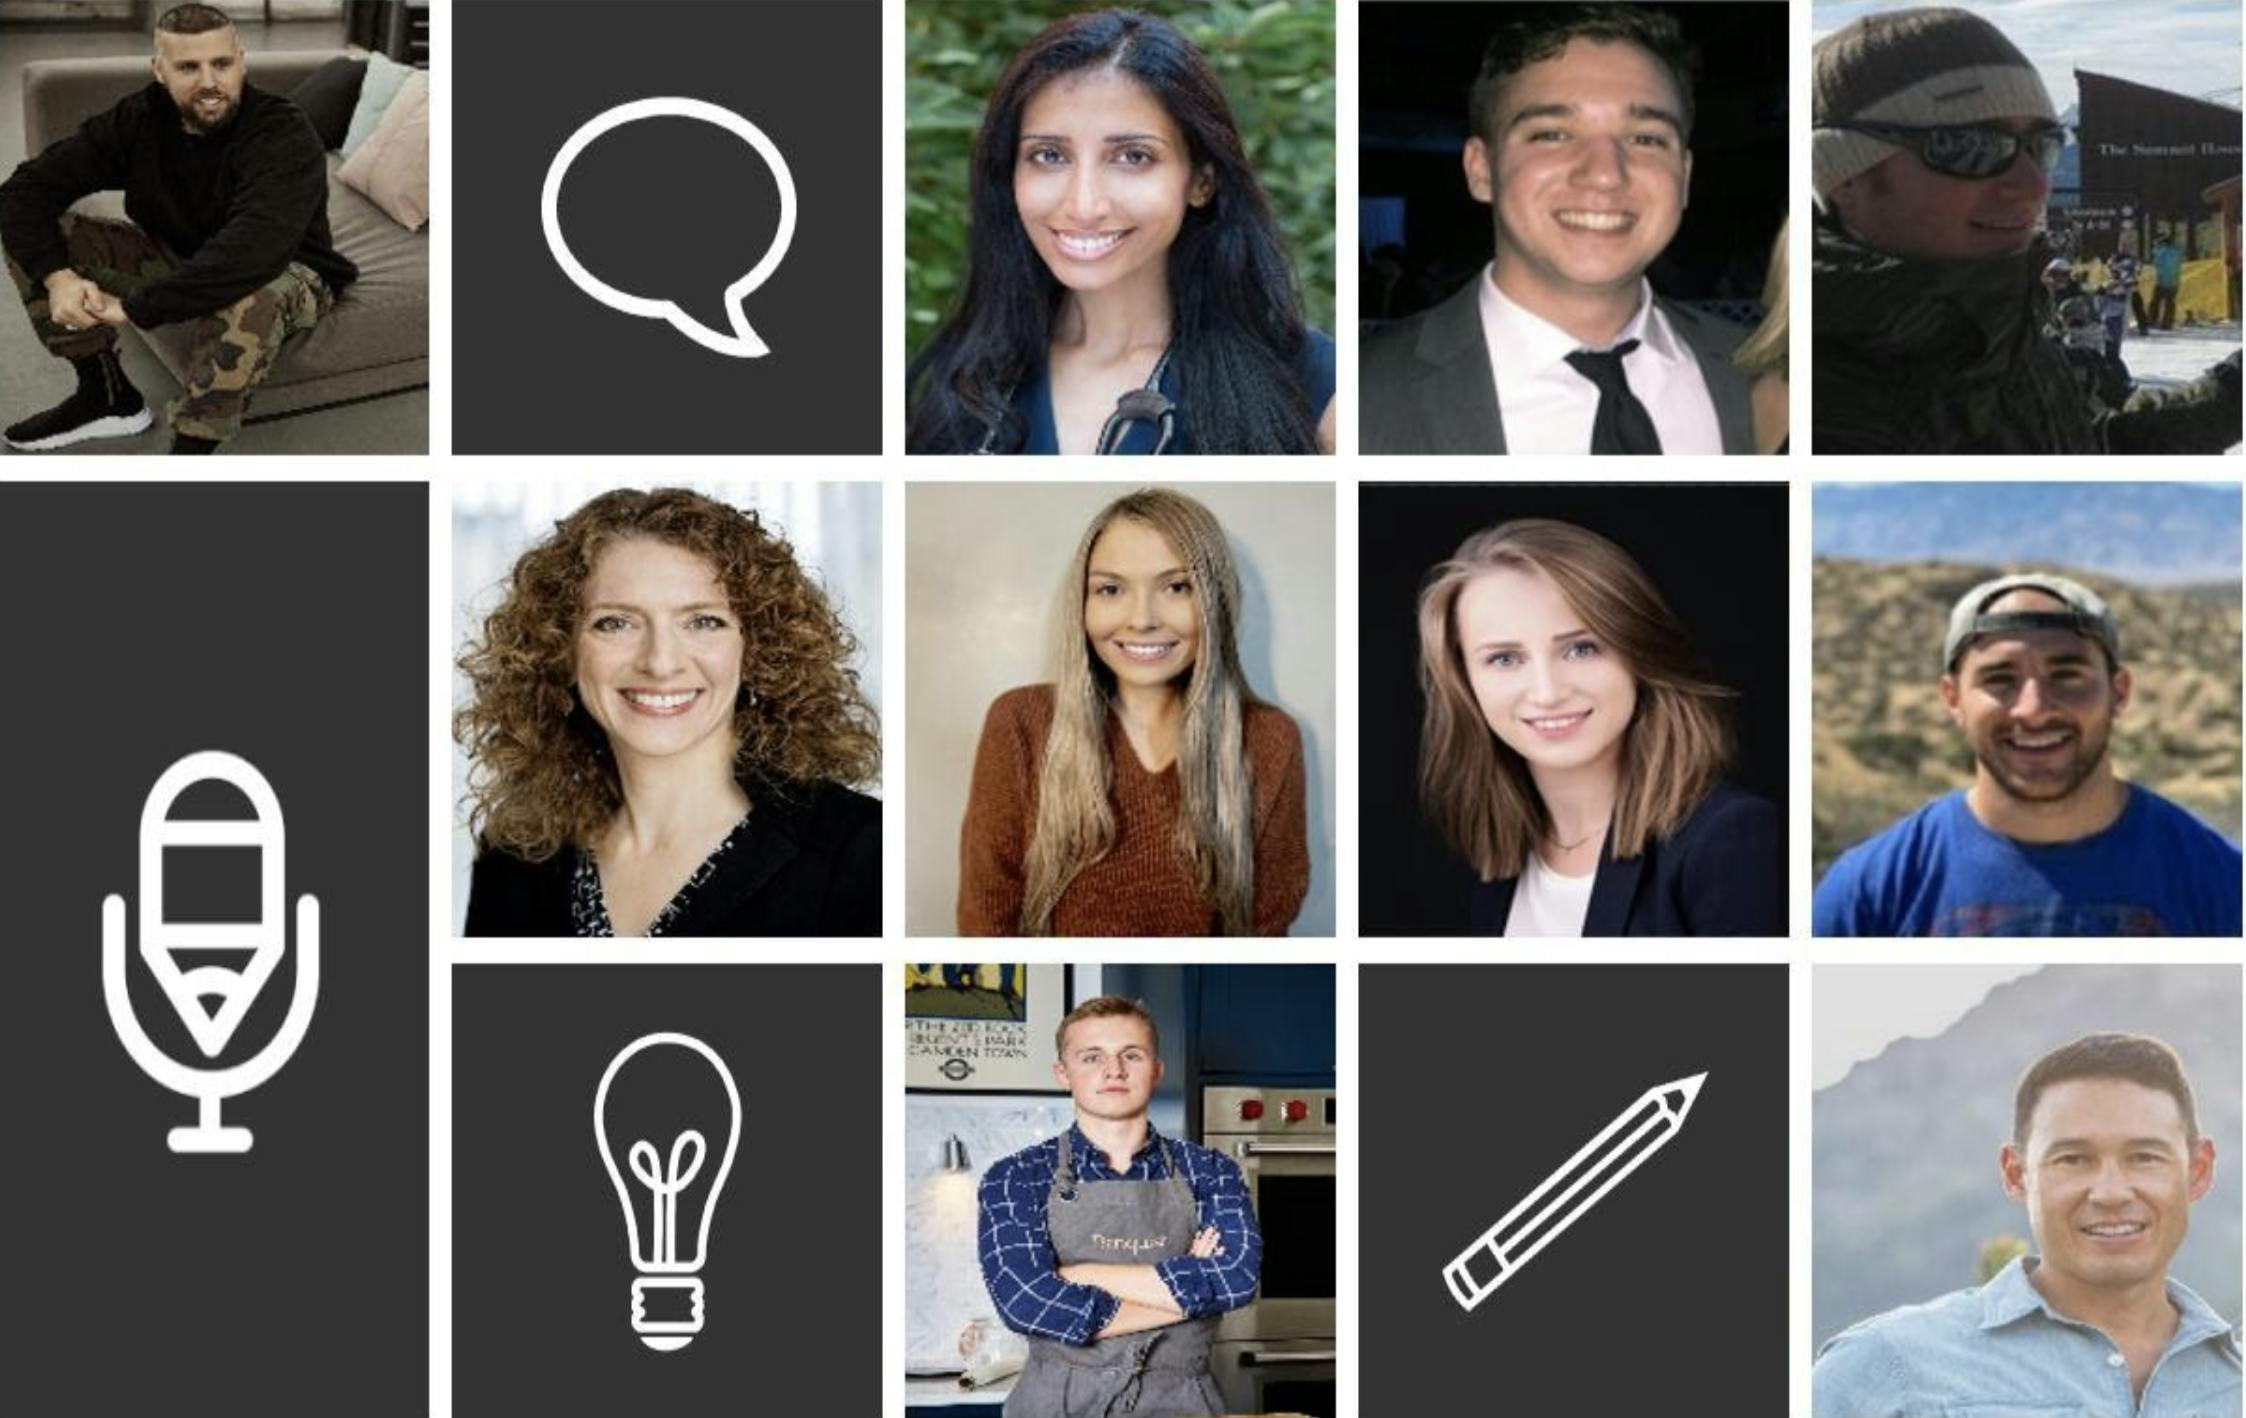 Collage of headshots of guest contributors to the blog post